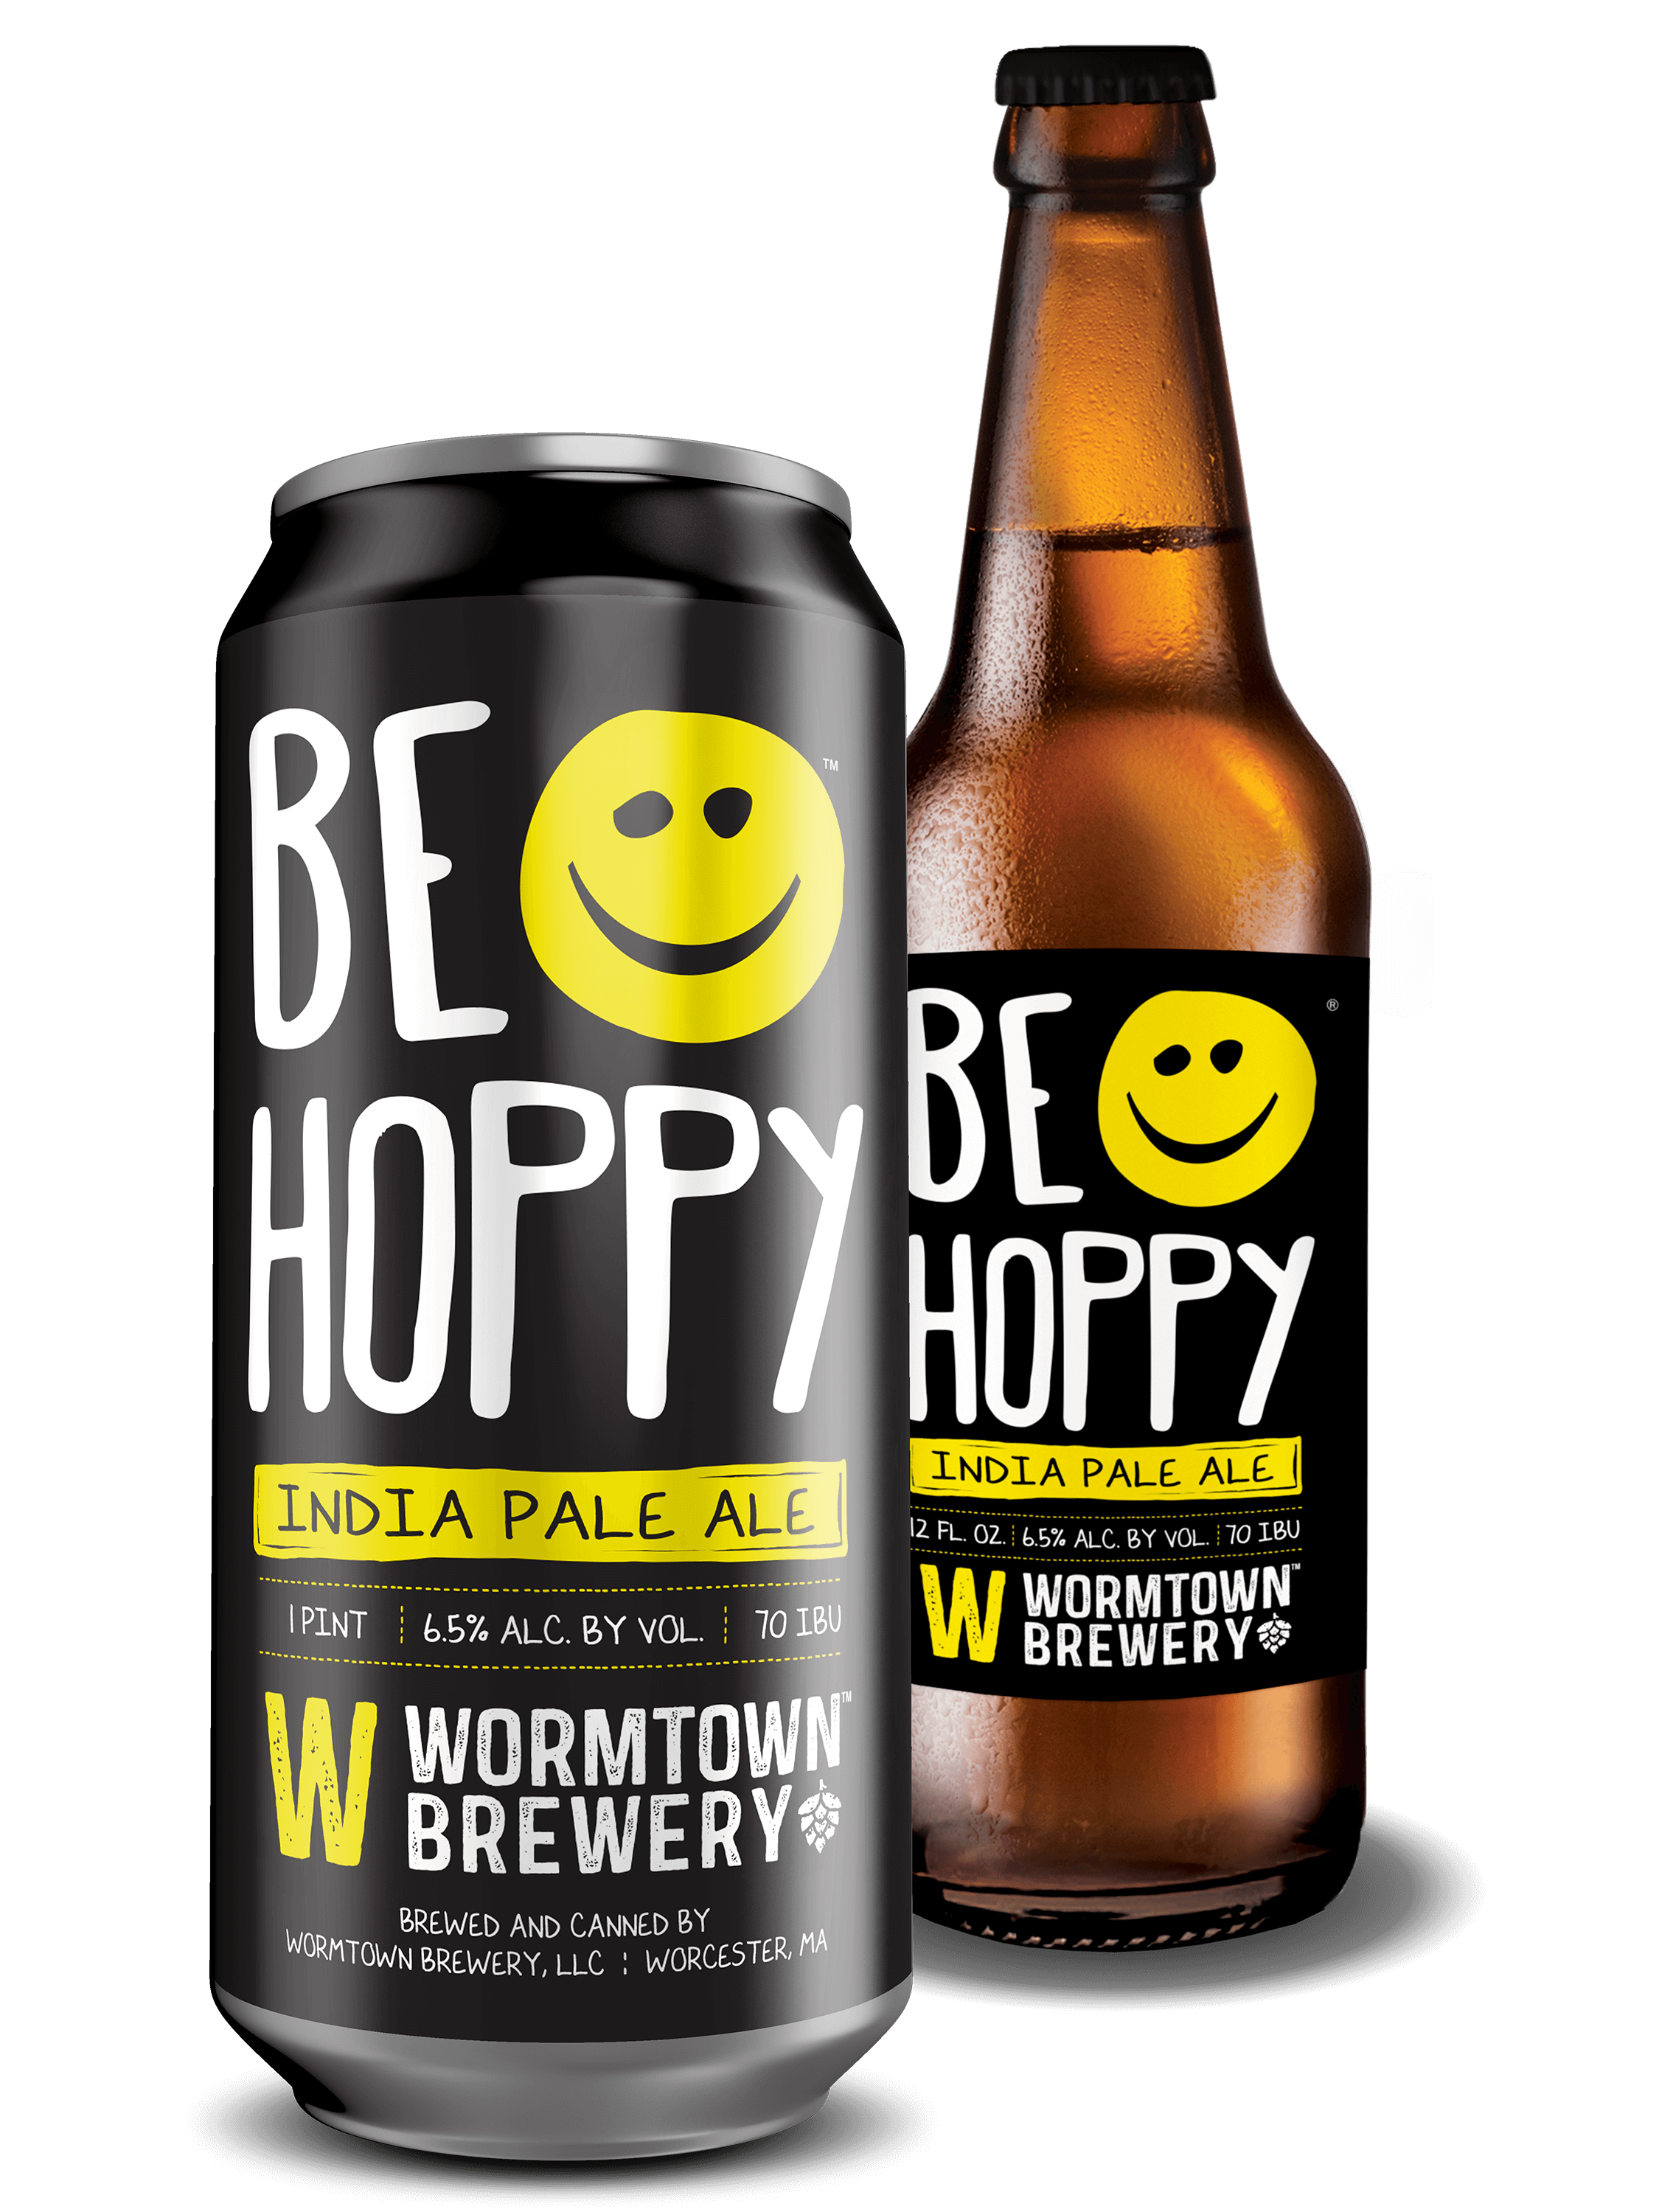 Wormtown Brewery's {"id":540,"brewery_id":130,"name":"Be Hoppy","image":"be-hoppy.png","slug":"wormtown-brewery\/be-hoppy","calories":null,"abv":"6.5","ibu":70,"type":"Ale","style":"IPA","description":"BE HOPPY is our take on the Left Coast IPA. The huge aromatics and big citrus forward flavors come from the copious amount of hops we use during our double dry hop and hop back processes. Let our IPA put a smile on your face Harvey Ball would be proud of. DON\u2019T WORRY BE HOPPY\u00ae","available":"All Year","created_at":null,"updated_at":null,"brewery":{"id":130,"user_id":null,"name":"Wormtown Brewery","slug":null,"logo":null,"description":"Ben had a vision for a brick and mortar brewery in his hometown of Worcester, MA and Tom was trying to figure out what to do with the addition on his restaurant that was the former home to Peppercorn\u2019s Ice Cream Factory. After a few beers one night on a bar stool, a plan was formed to start a brewery that would be committed to being local both in our branding and our ingredients.\r\nThe brewery officially opened on March 17, 2010 and we really weren\u2019t sure what to expect\u2026 worst case we\u2019d have a lot of beer to share with our friends. Luckily, we received incredible support from our local community that extended to the entire beer community, with medals at GABF, World Beer Cup and numerous awards around the globe since.","website":"https:\/\/wormtownbrewery.com\/","address":"72 Shrewsbury Street<br>\r\nWorcester, MA 01604","facebook_url":null,"twitter_url":null,"instagram_url":null,"created_at":null,"updated_at":null}}